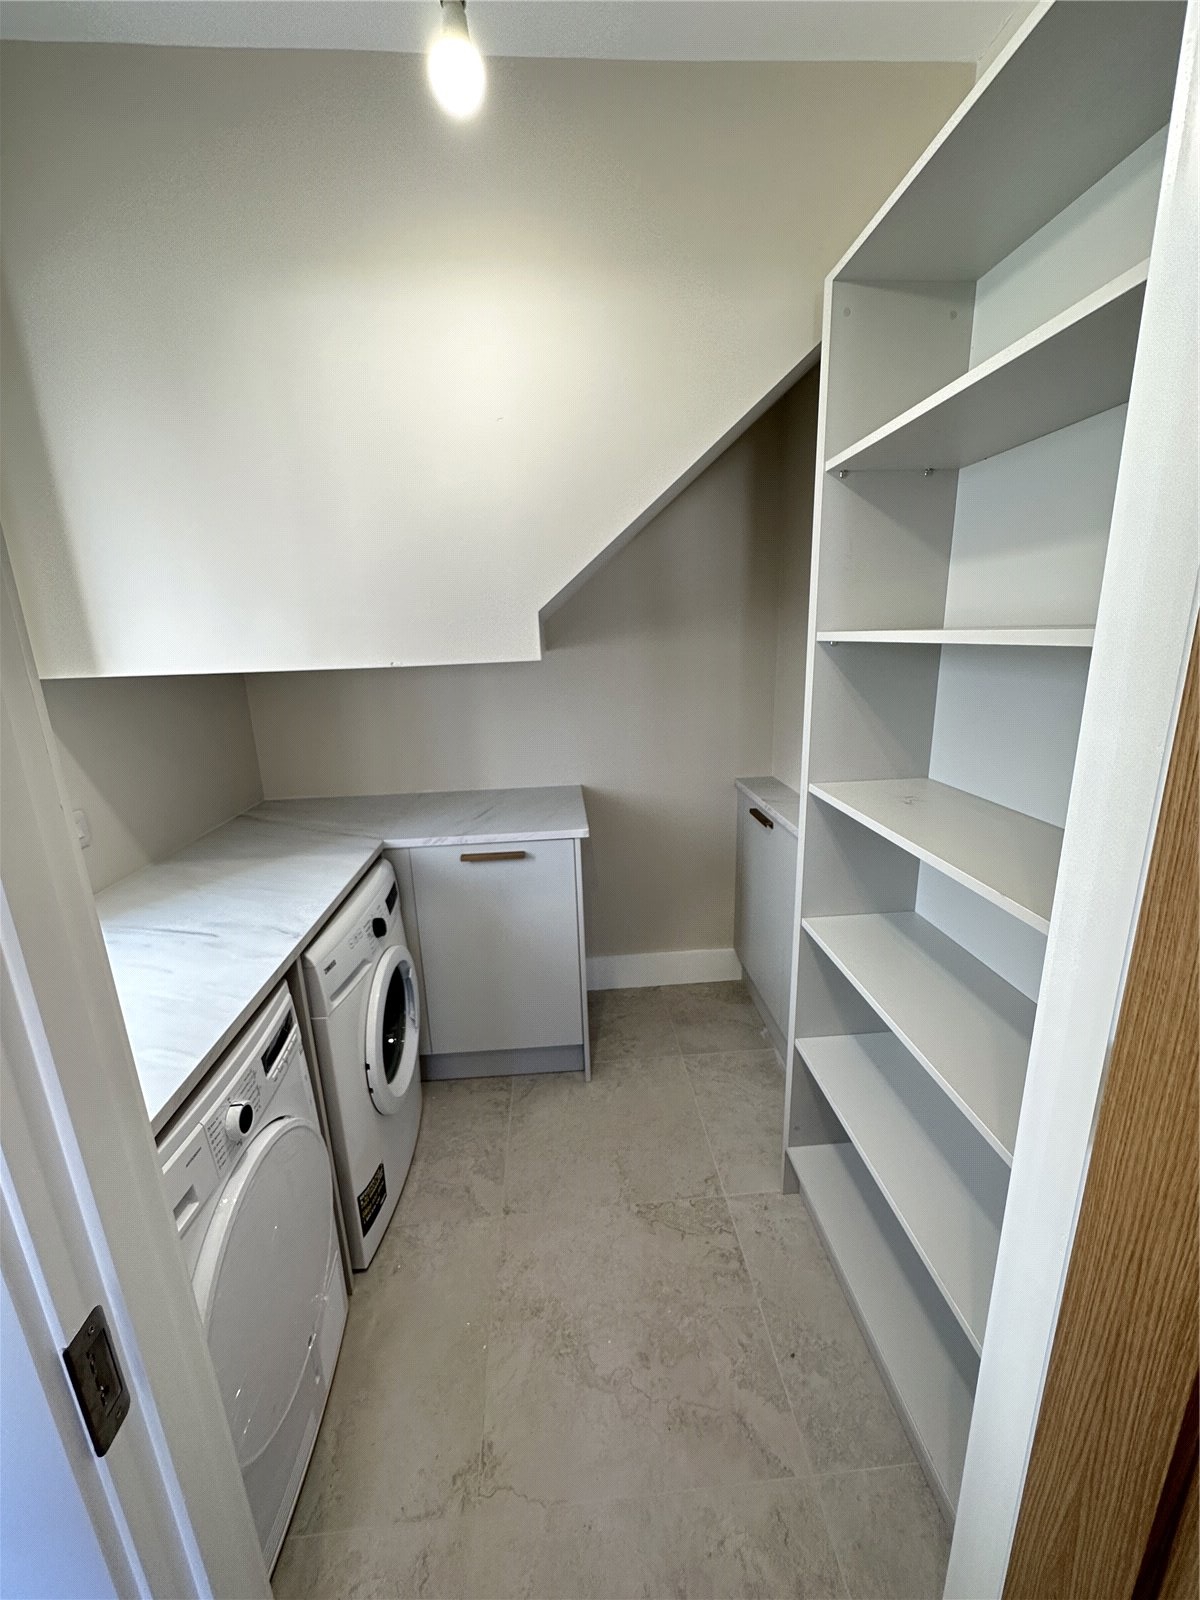 A modern laundry room with white cabinets, built-in shelving, a washer, and a dryer, featuring a neutral color scheme and tiled flooring.